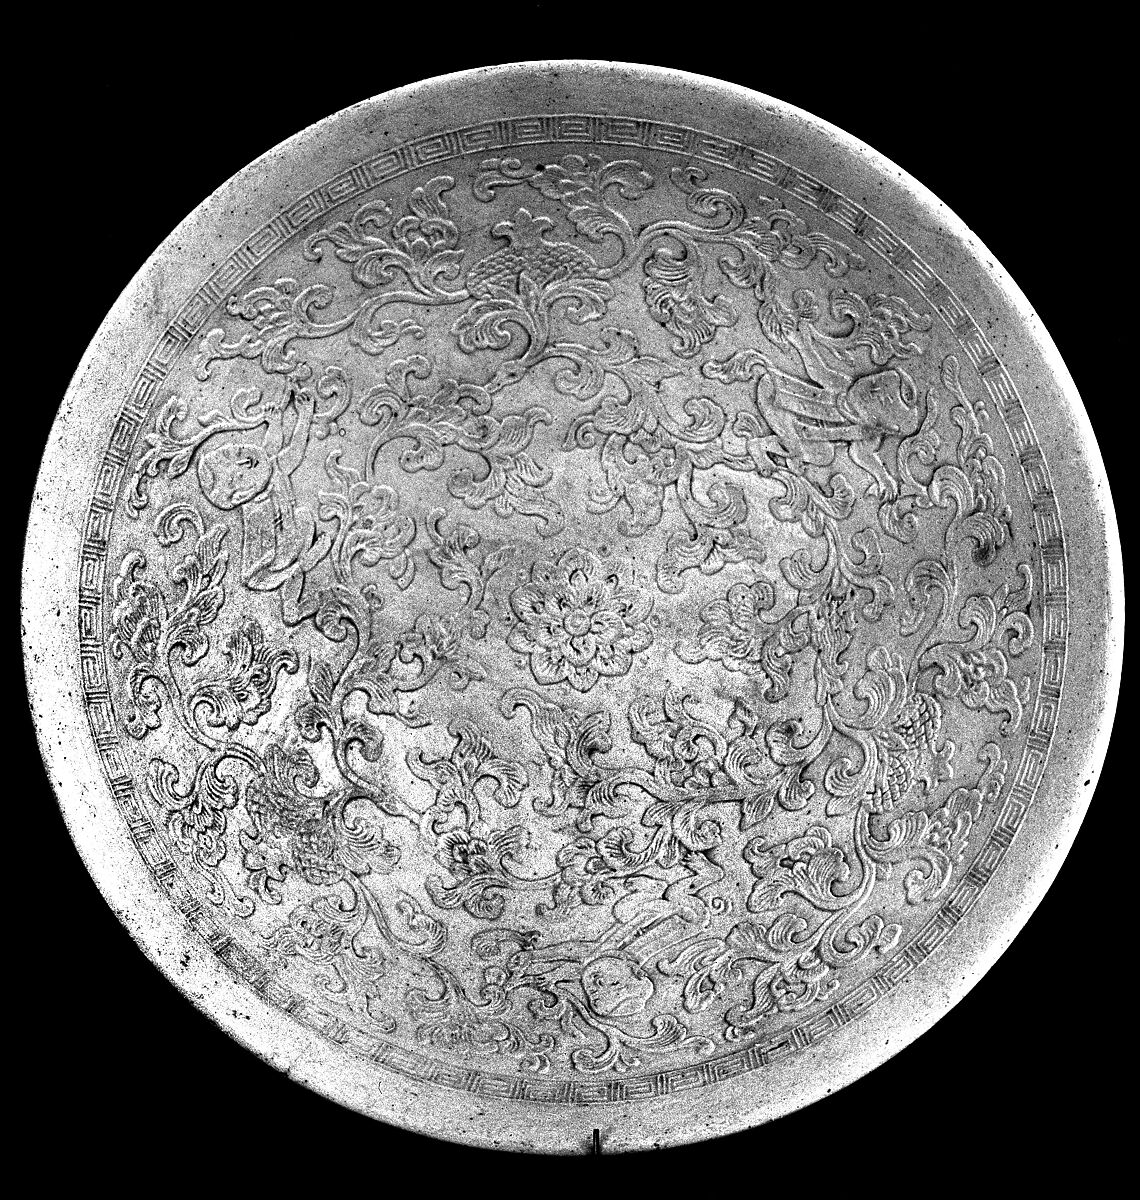 Bowl with boys amid floral sprays, Porcleain with impressed-mold decoration (Jingdezhen ware), China 